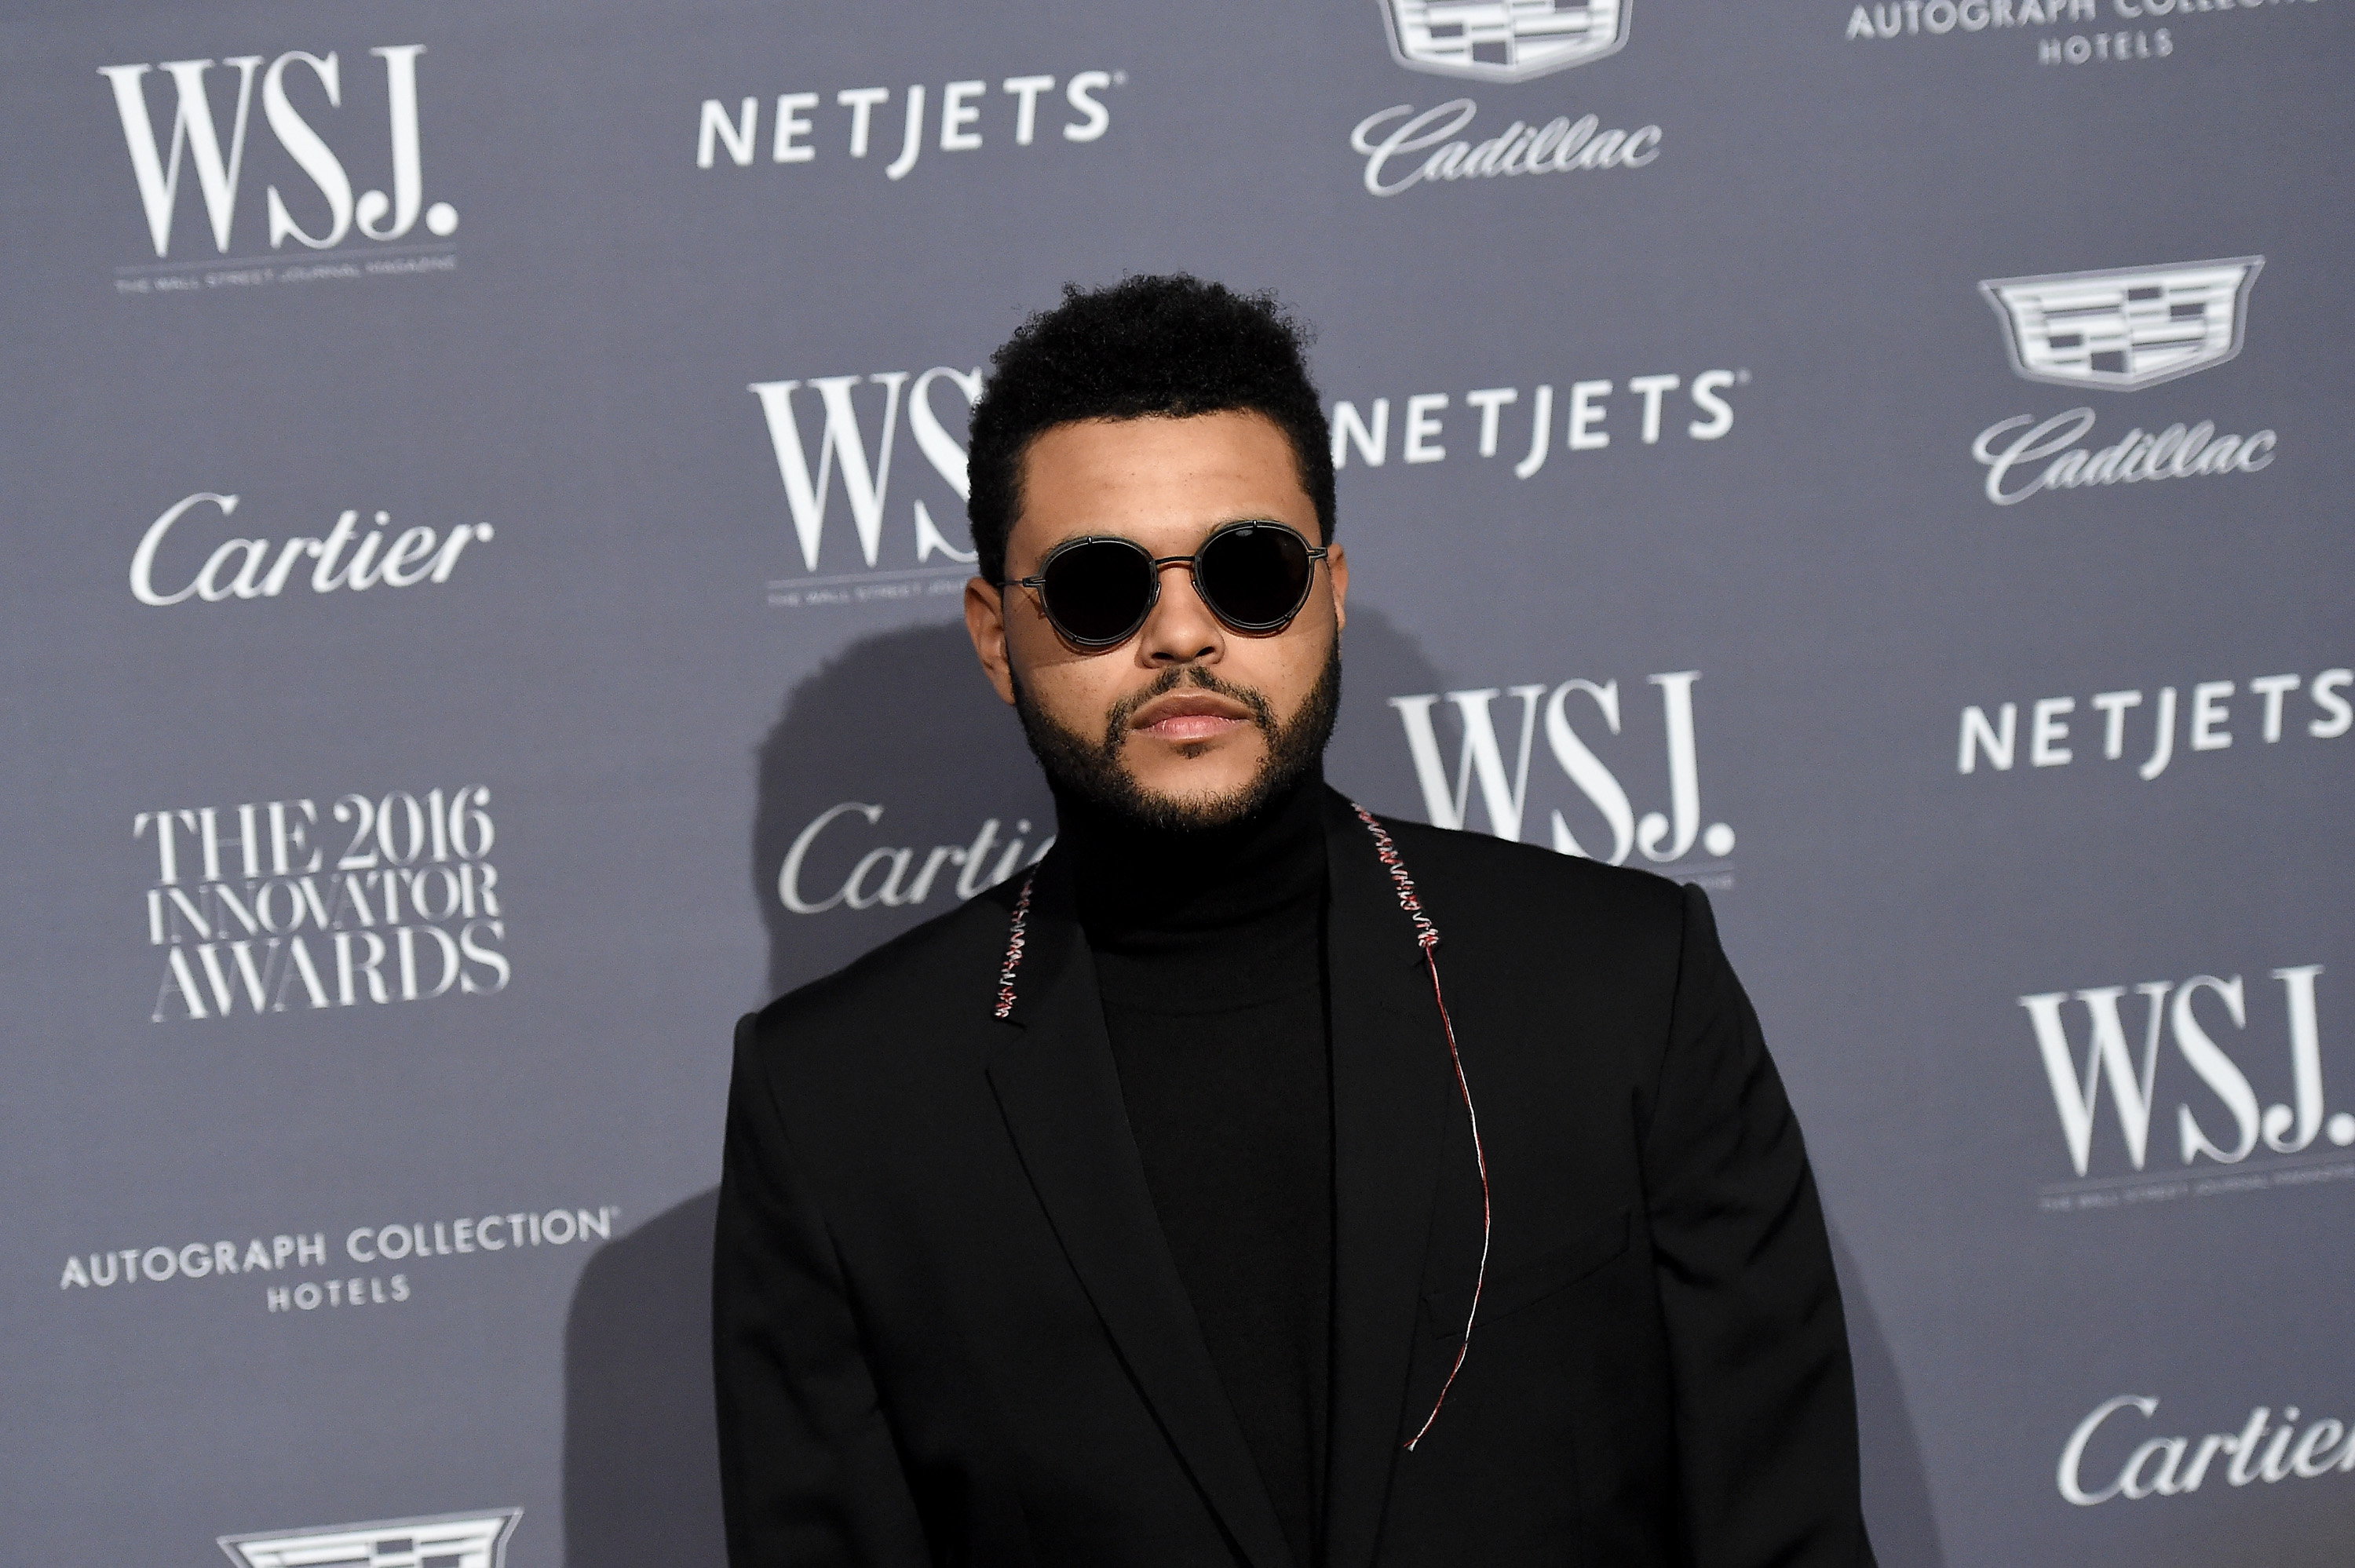 The Weeknd attends the WSJ Magazine Innovator Awards on November 2, 2016 in New York City. (Photo by Nicholas Hunt/Getty)